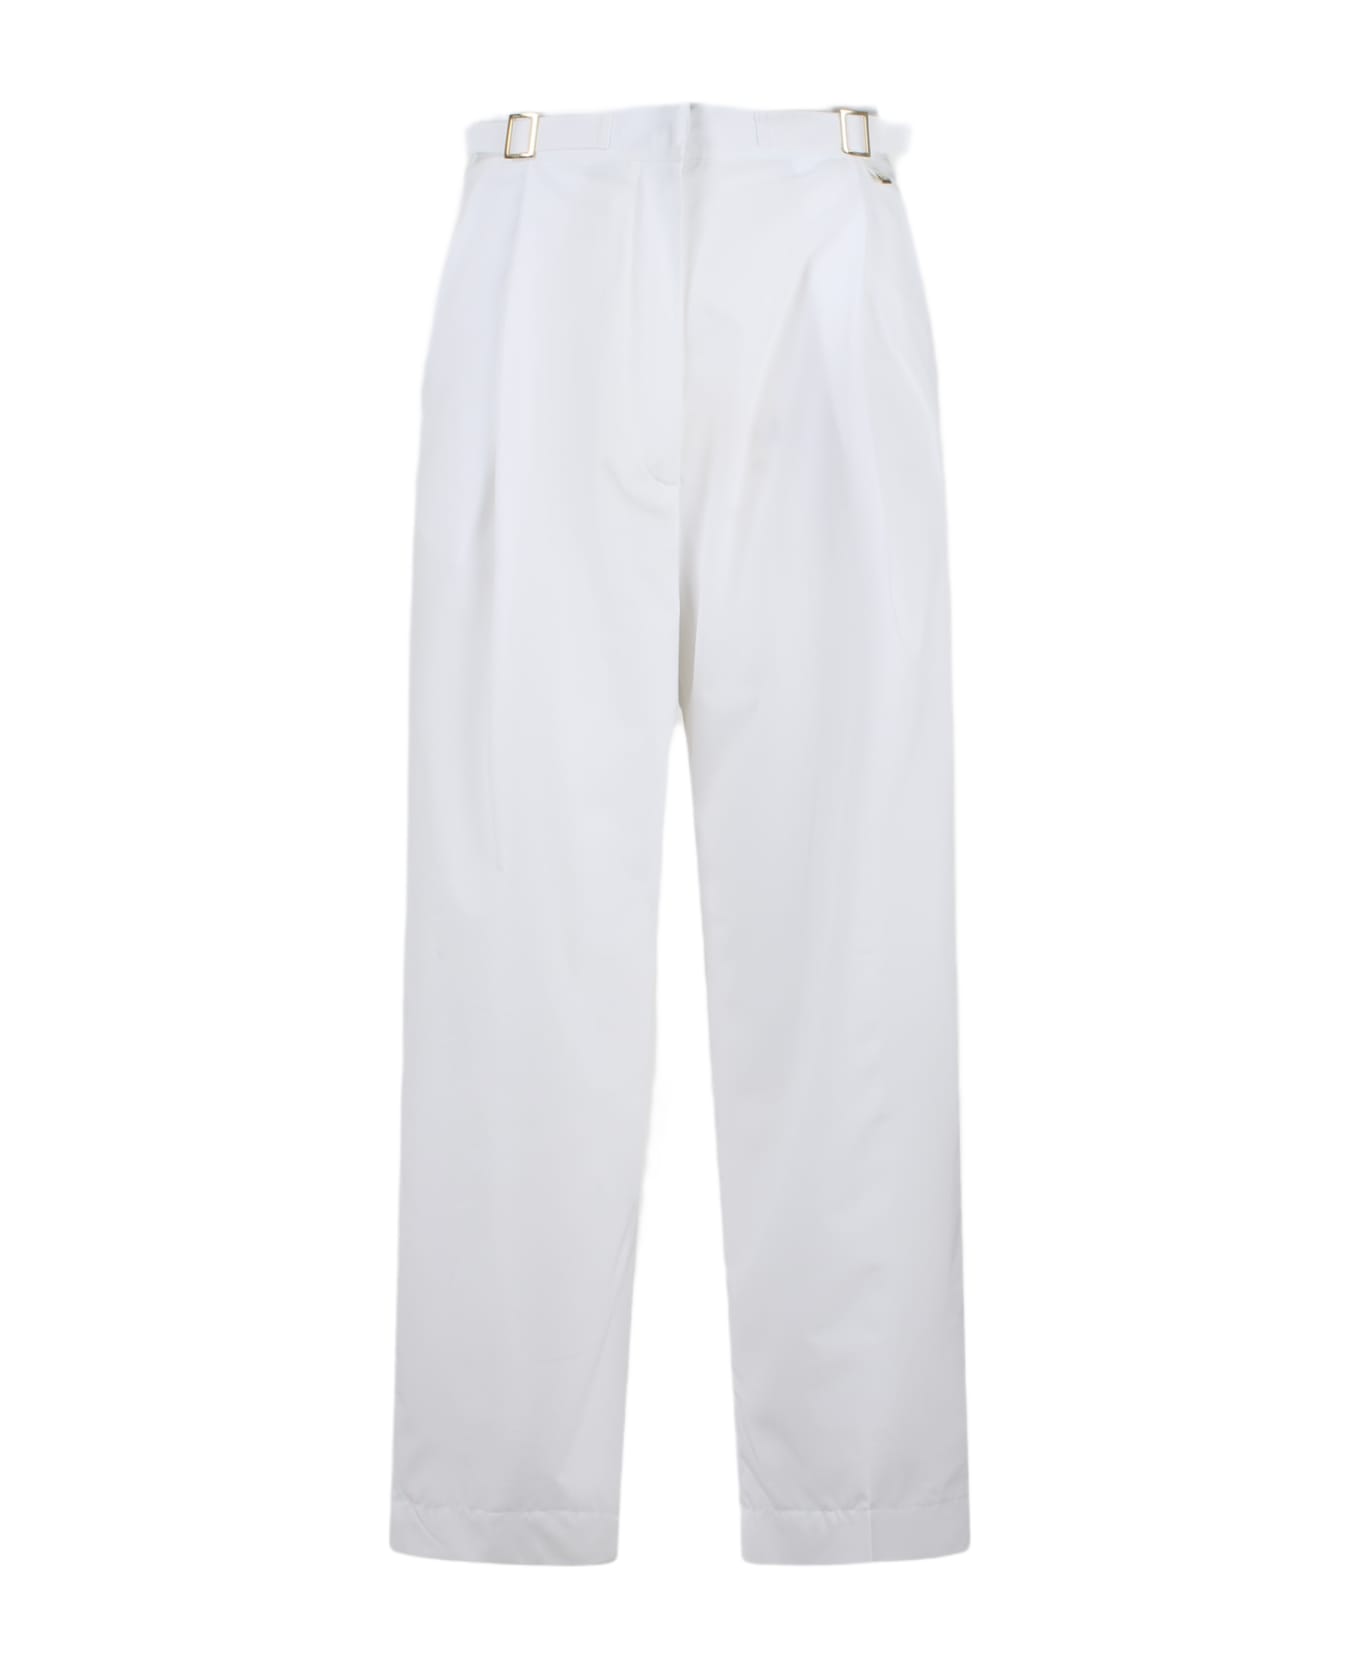 Herno Structures Nylon Trousers - White ボトムス